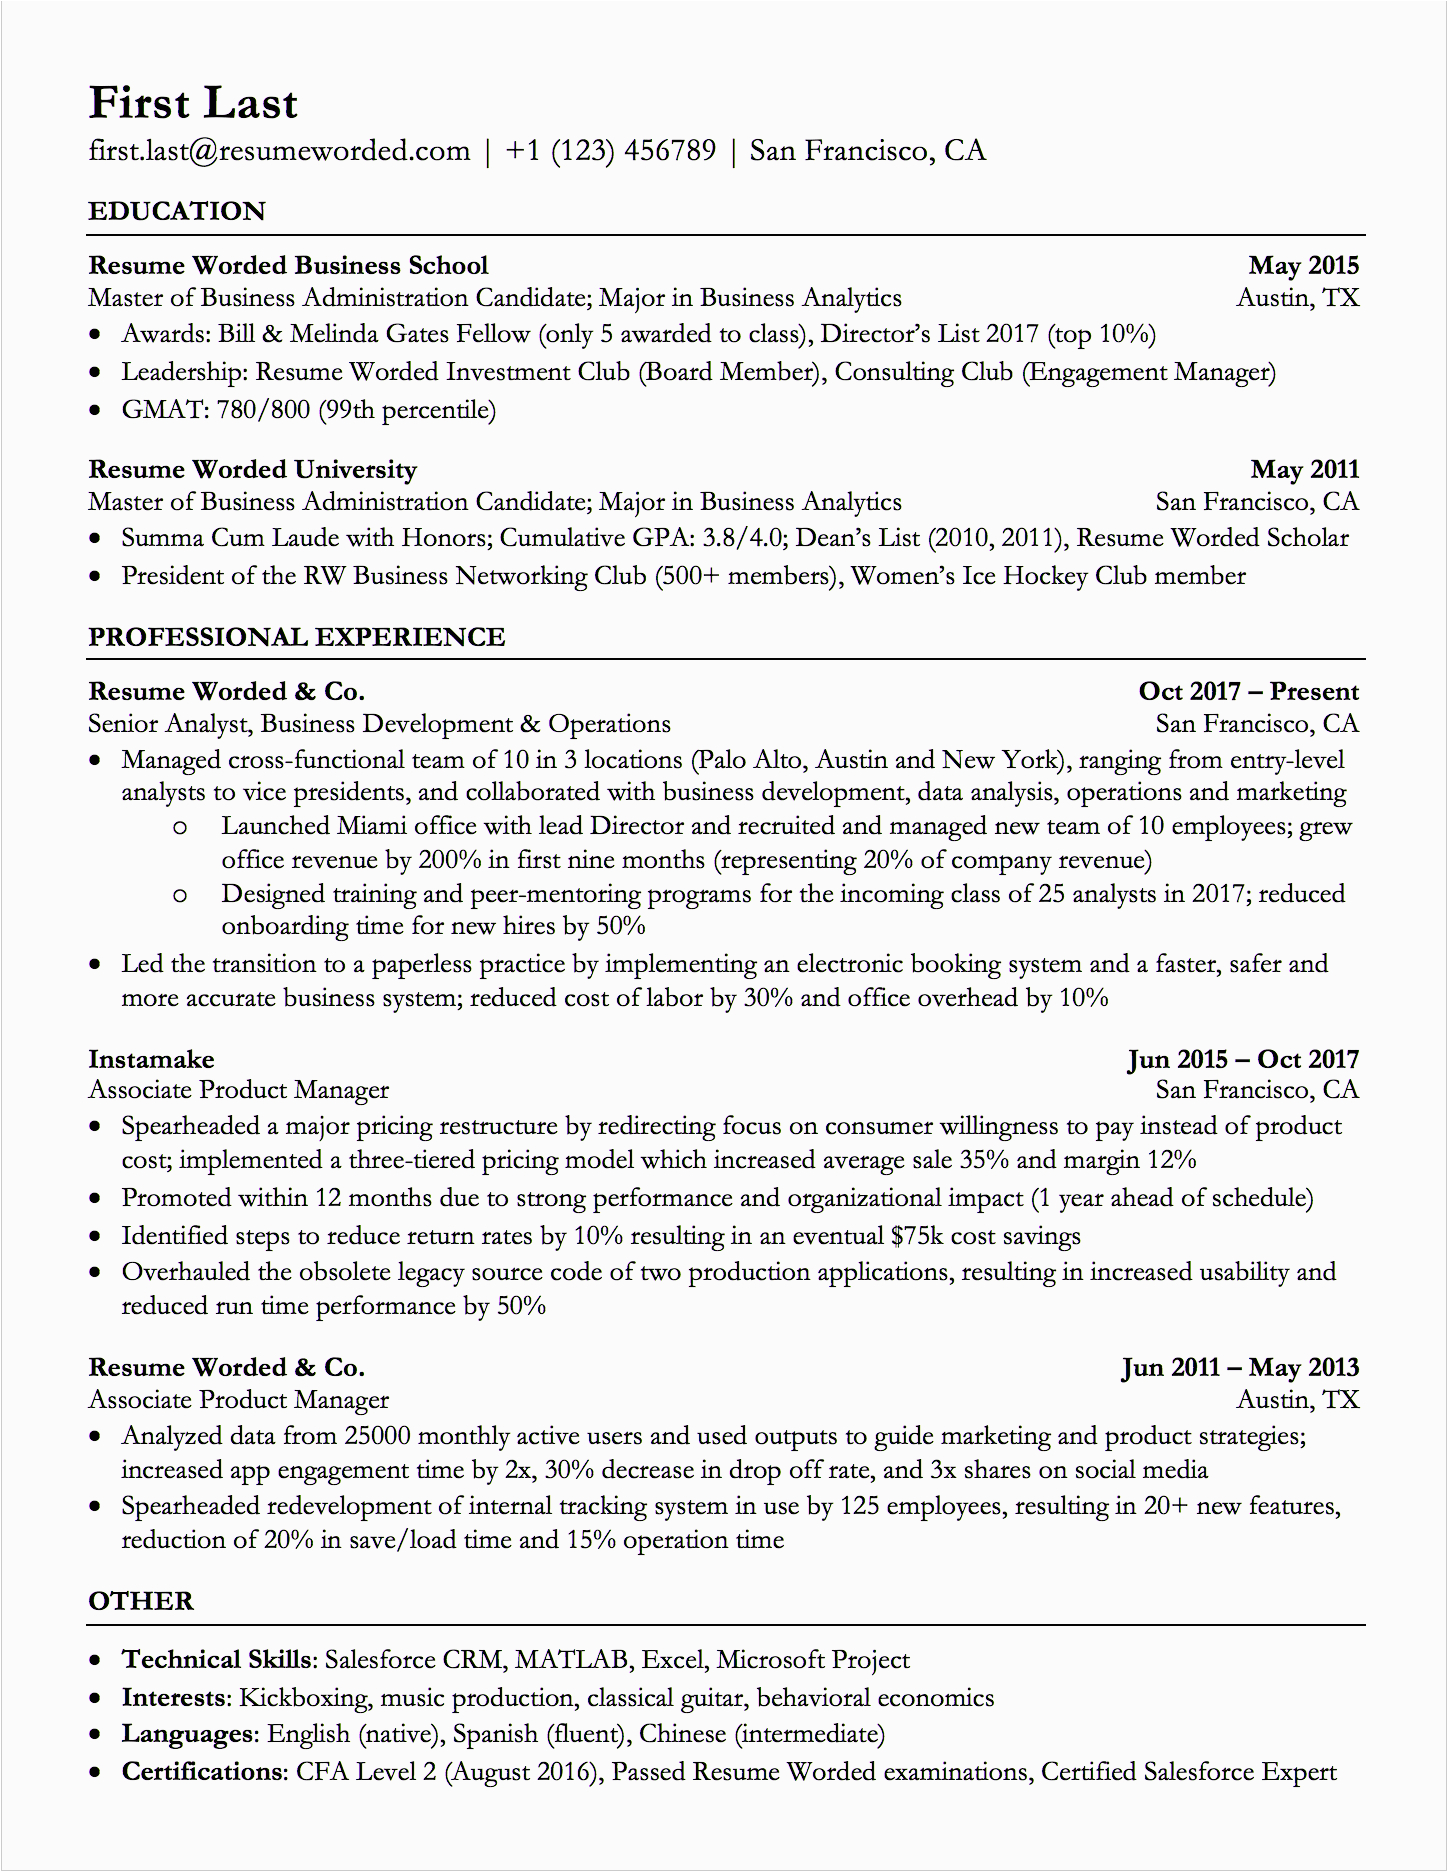 Resume Samples College Graduate Entry Level Professional ats Resume Templates for Experienced Hires and College